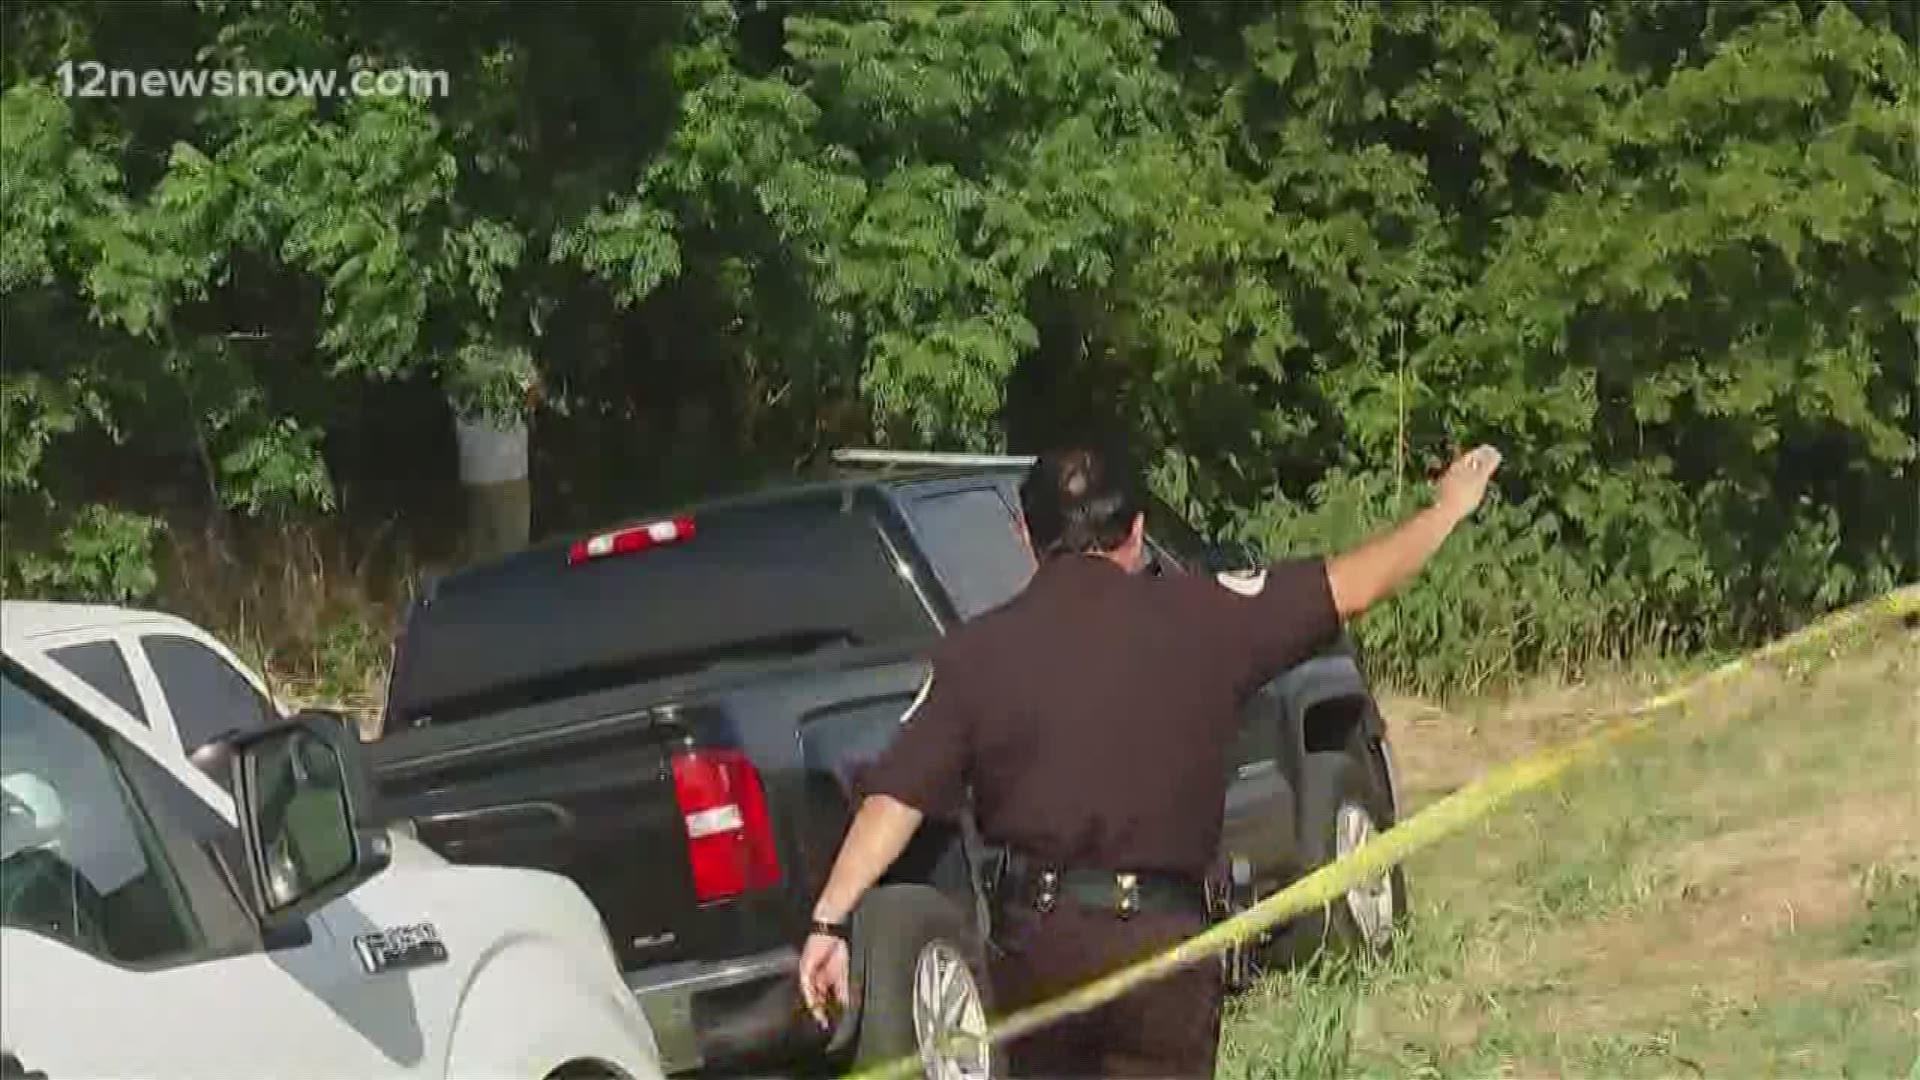 The remains were found in an area that was searched earlier in June